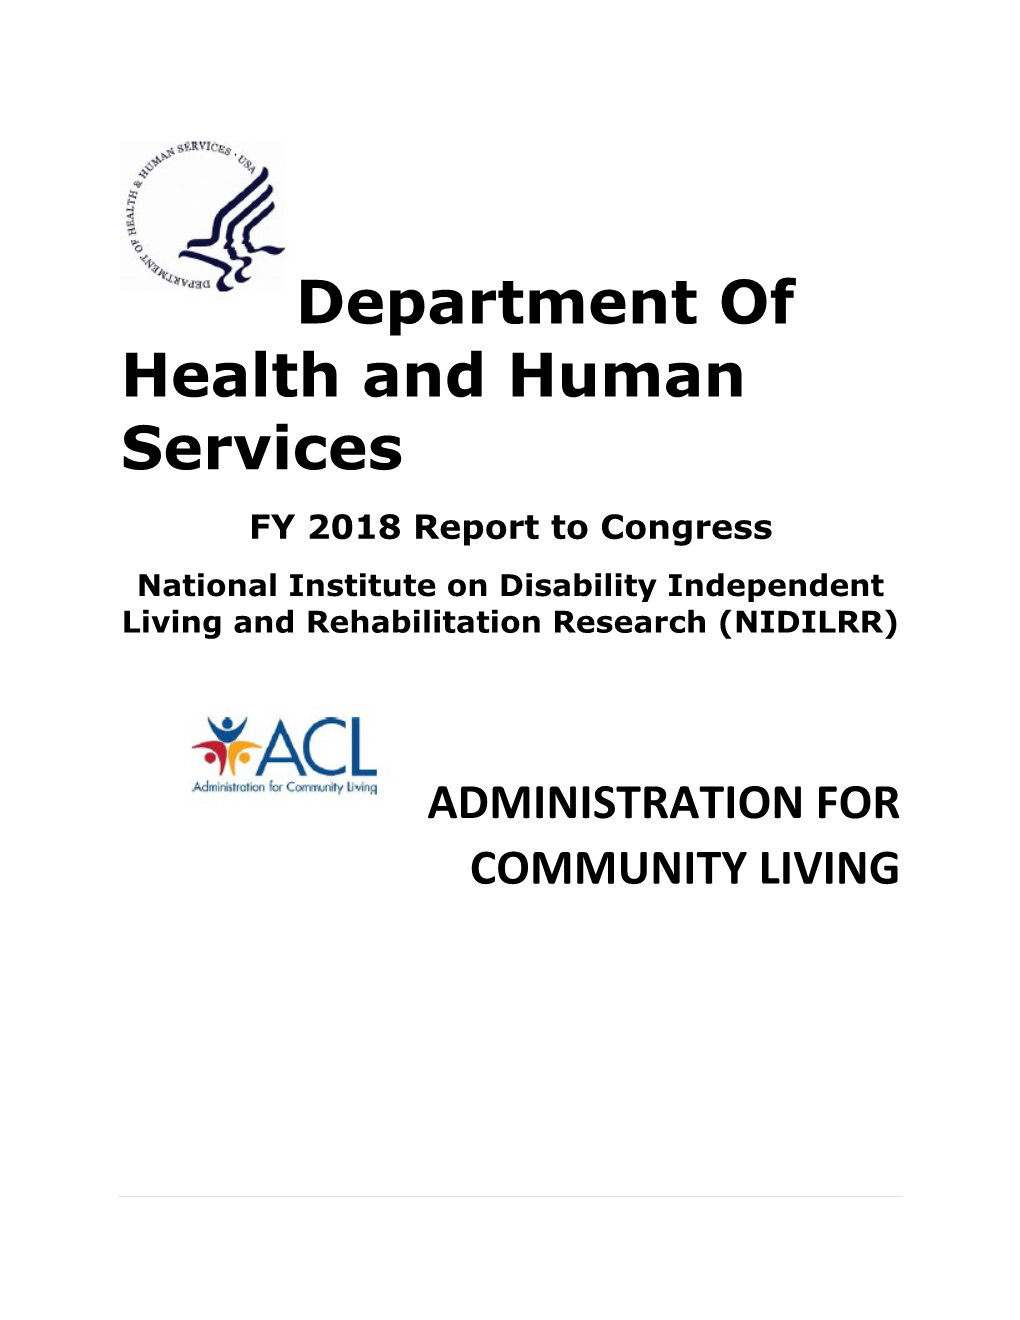 NIDILRR FY 2018 Report to Congress